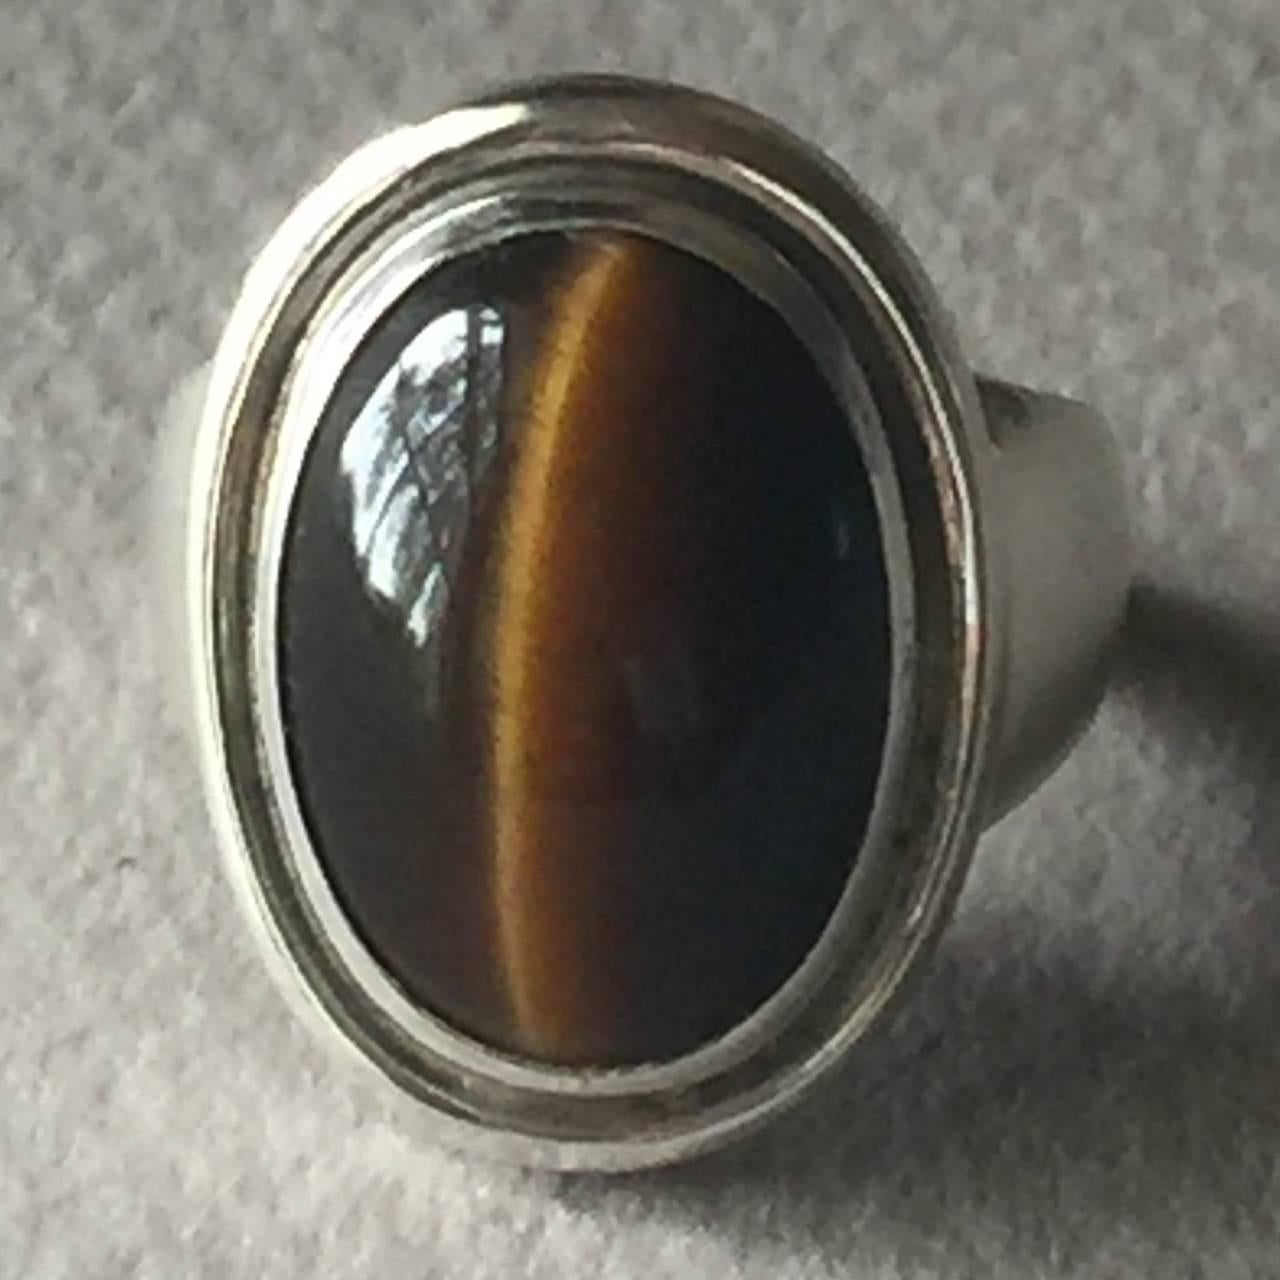 Georg Jensen Sterling Silver Tiger's Eye Ring No. 46A by Harald Nielsen

This ring is sure to impress. The tiger's eye is bright and gleams beautifully. Rare and hard to find with this stone. 

Size 7

Harald Nielsen bio: Harald Nielsen (1892